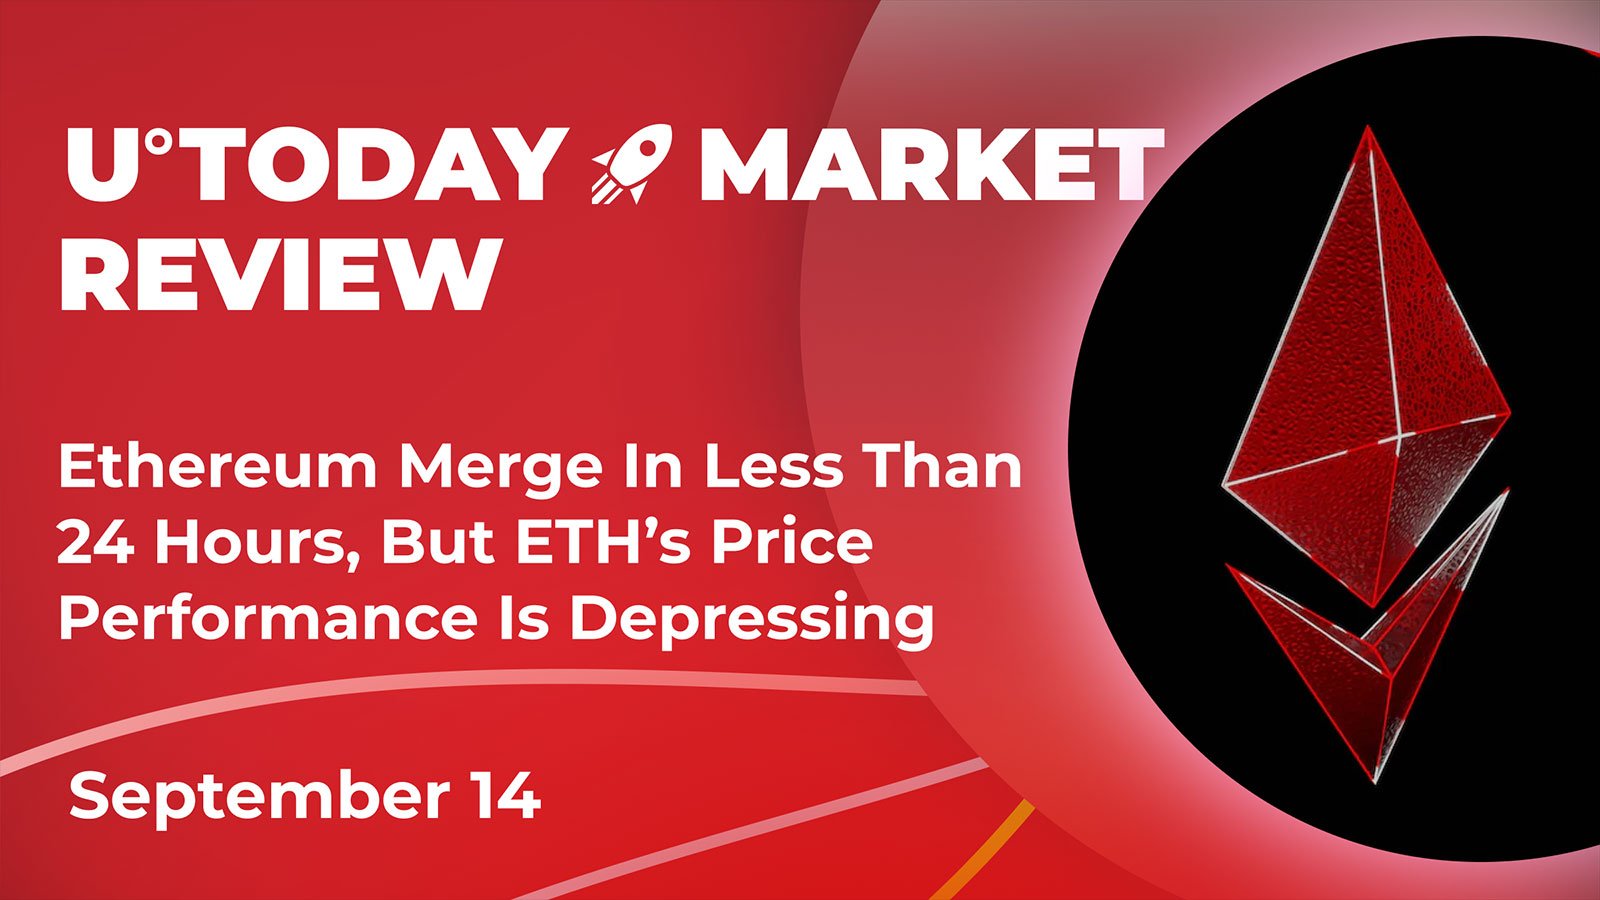 Ethereum Merge In Less Than 24 Hours, But ETH’s Price Performance Is Depressing: Crypto Market Review, September 14